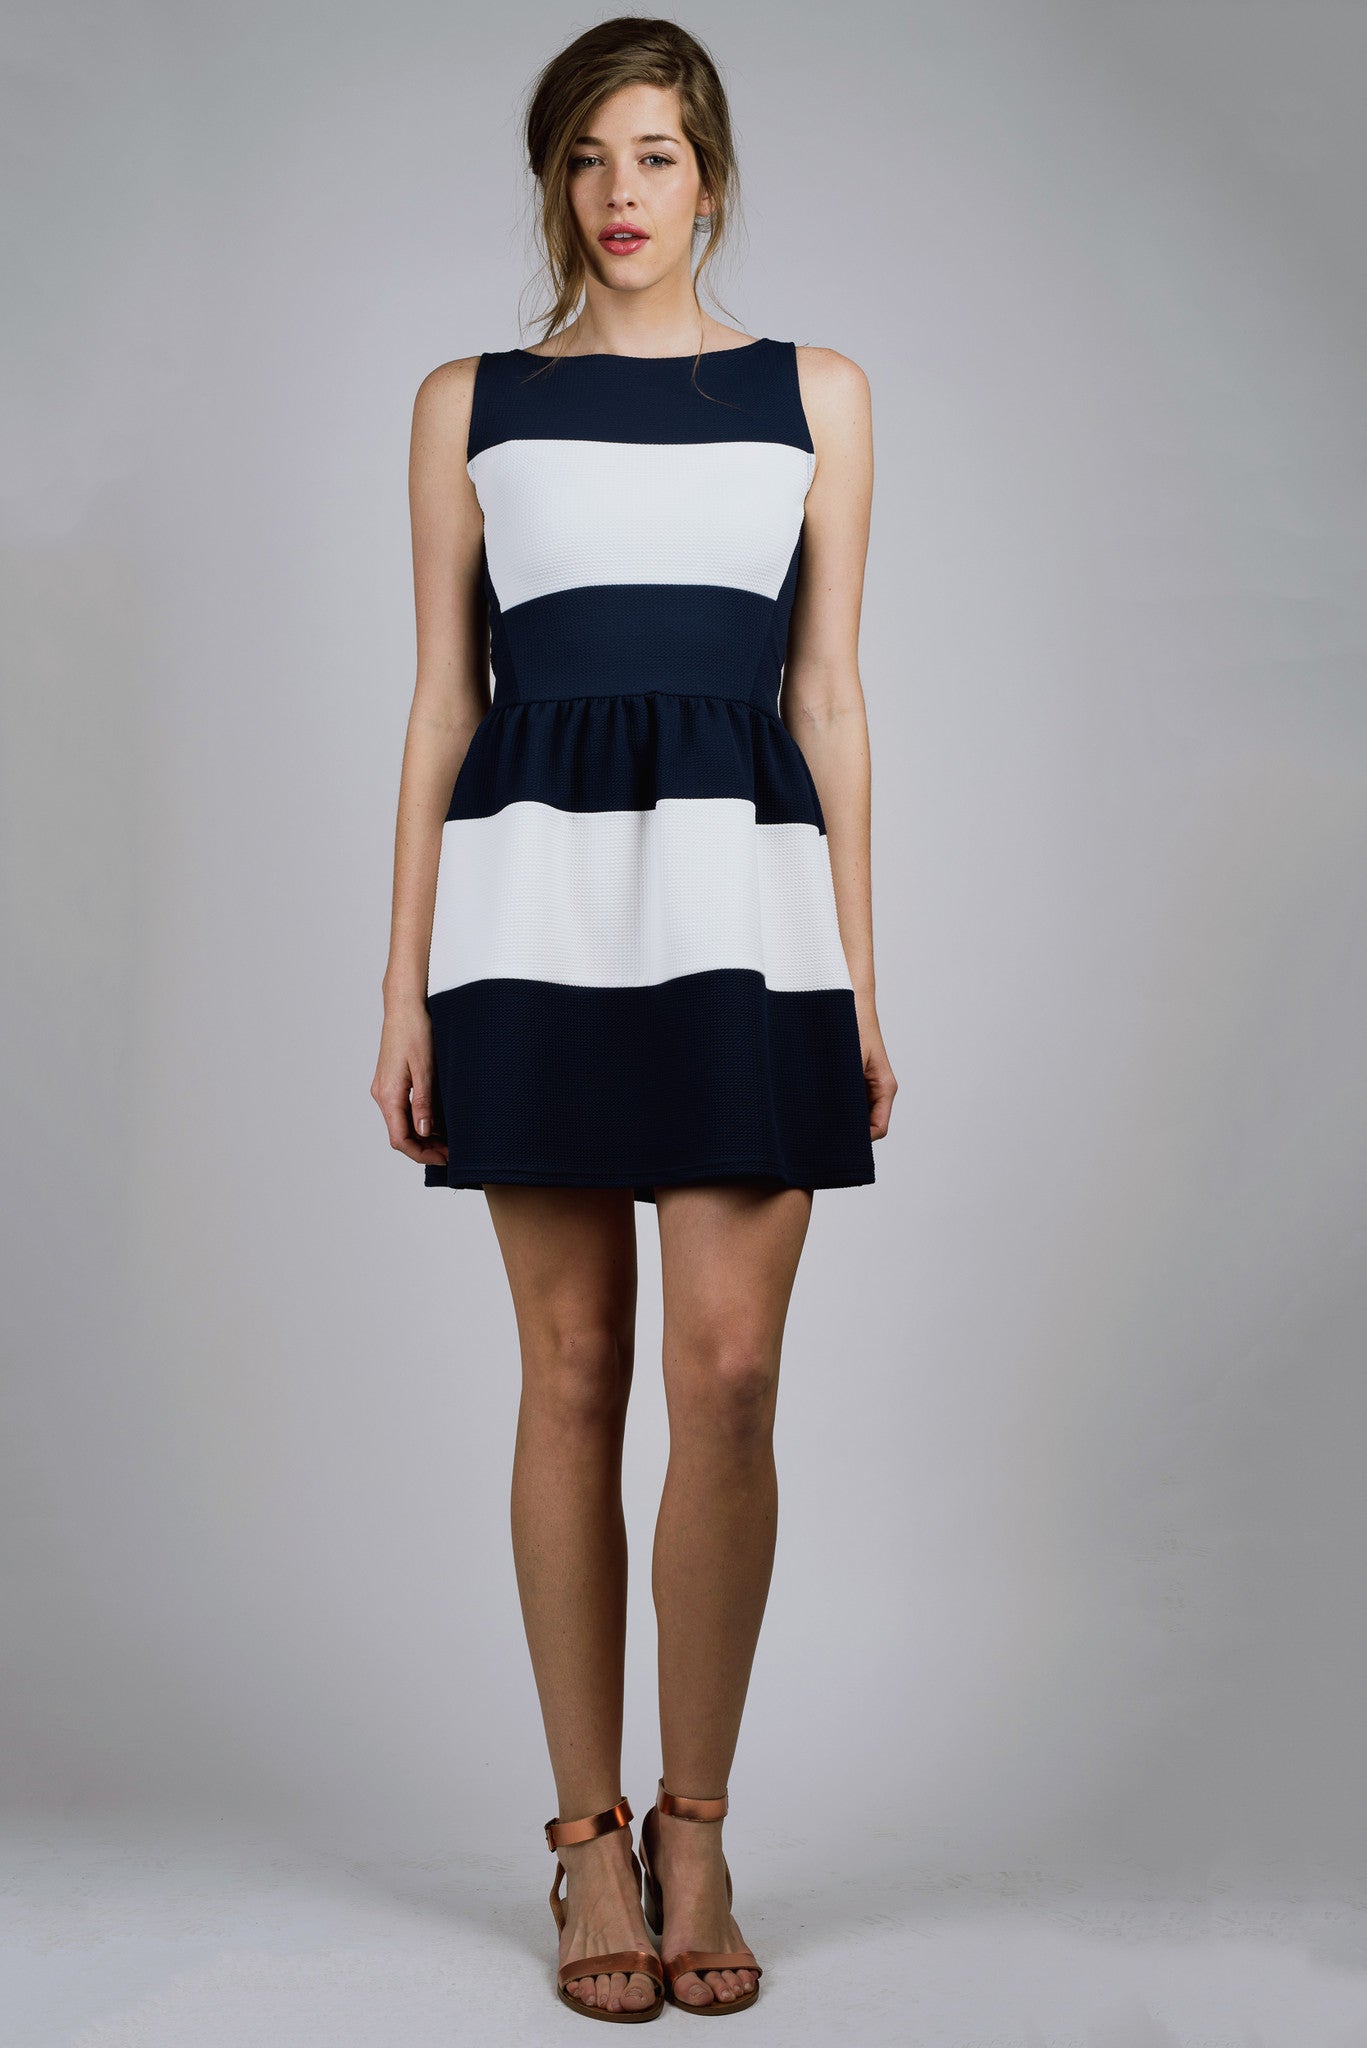 Navy and White, Geometric Print, Striped Party Dress, Spring